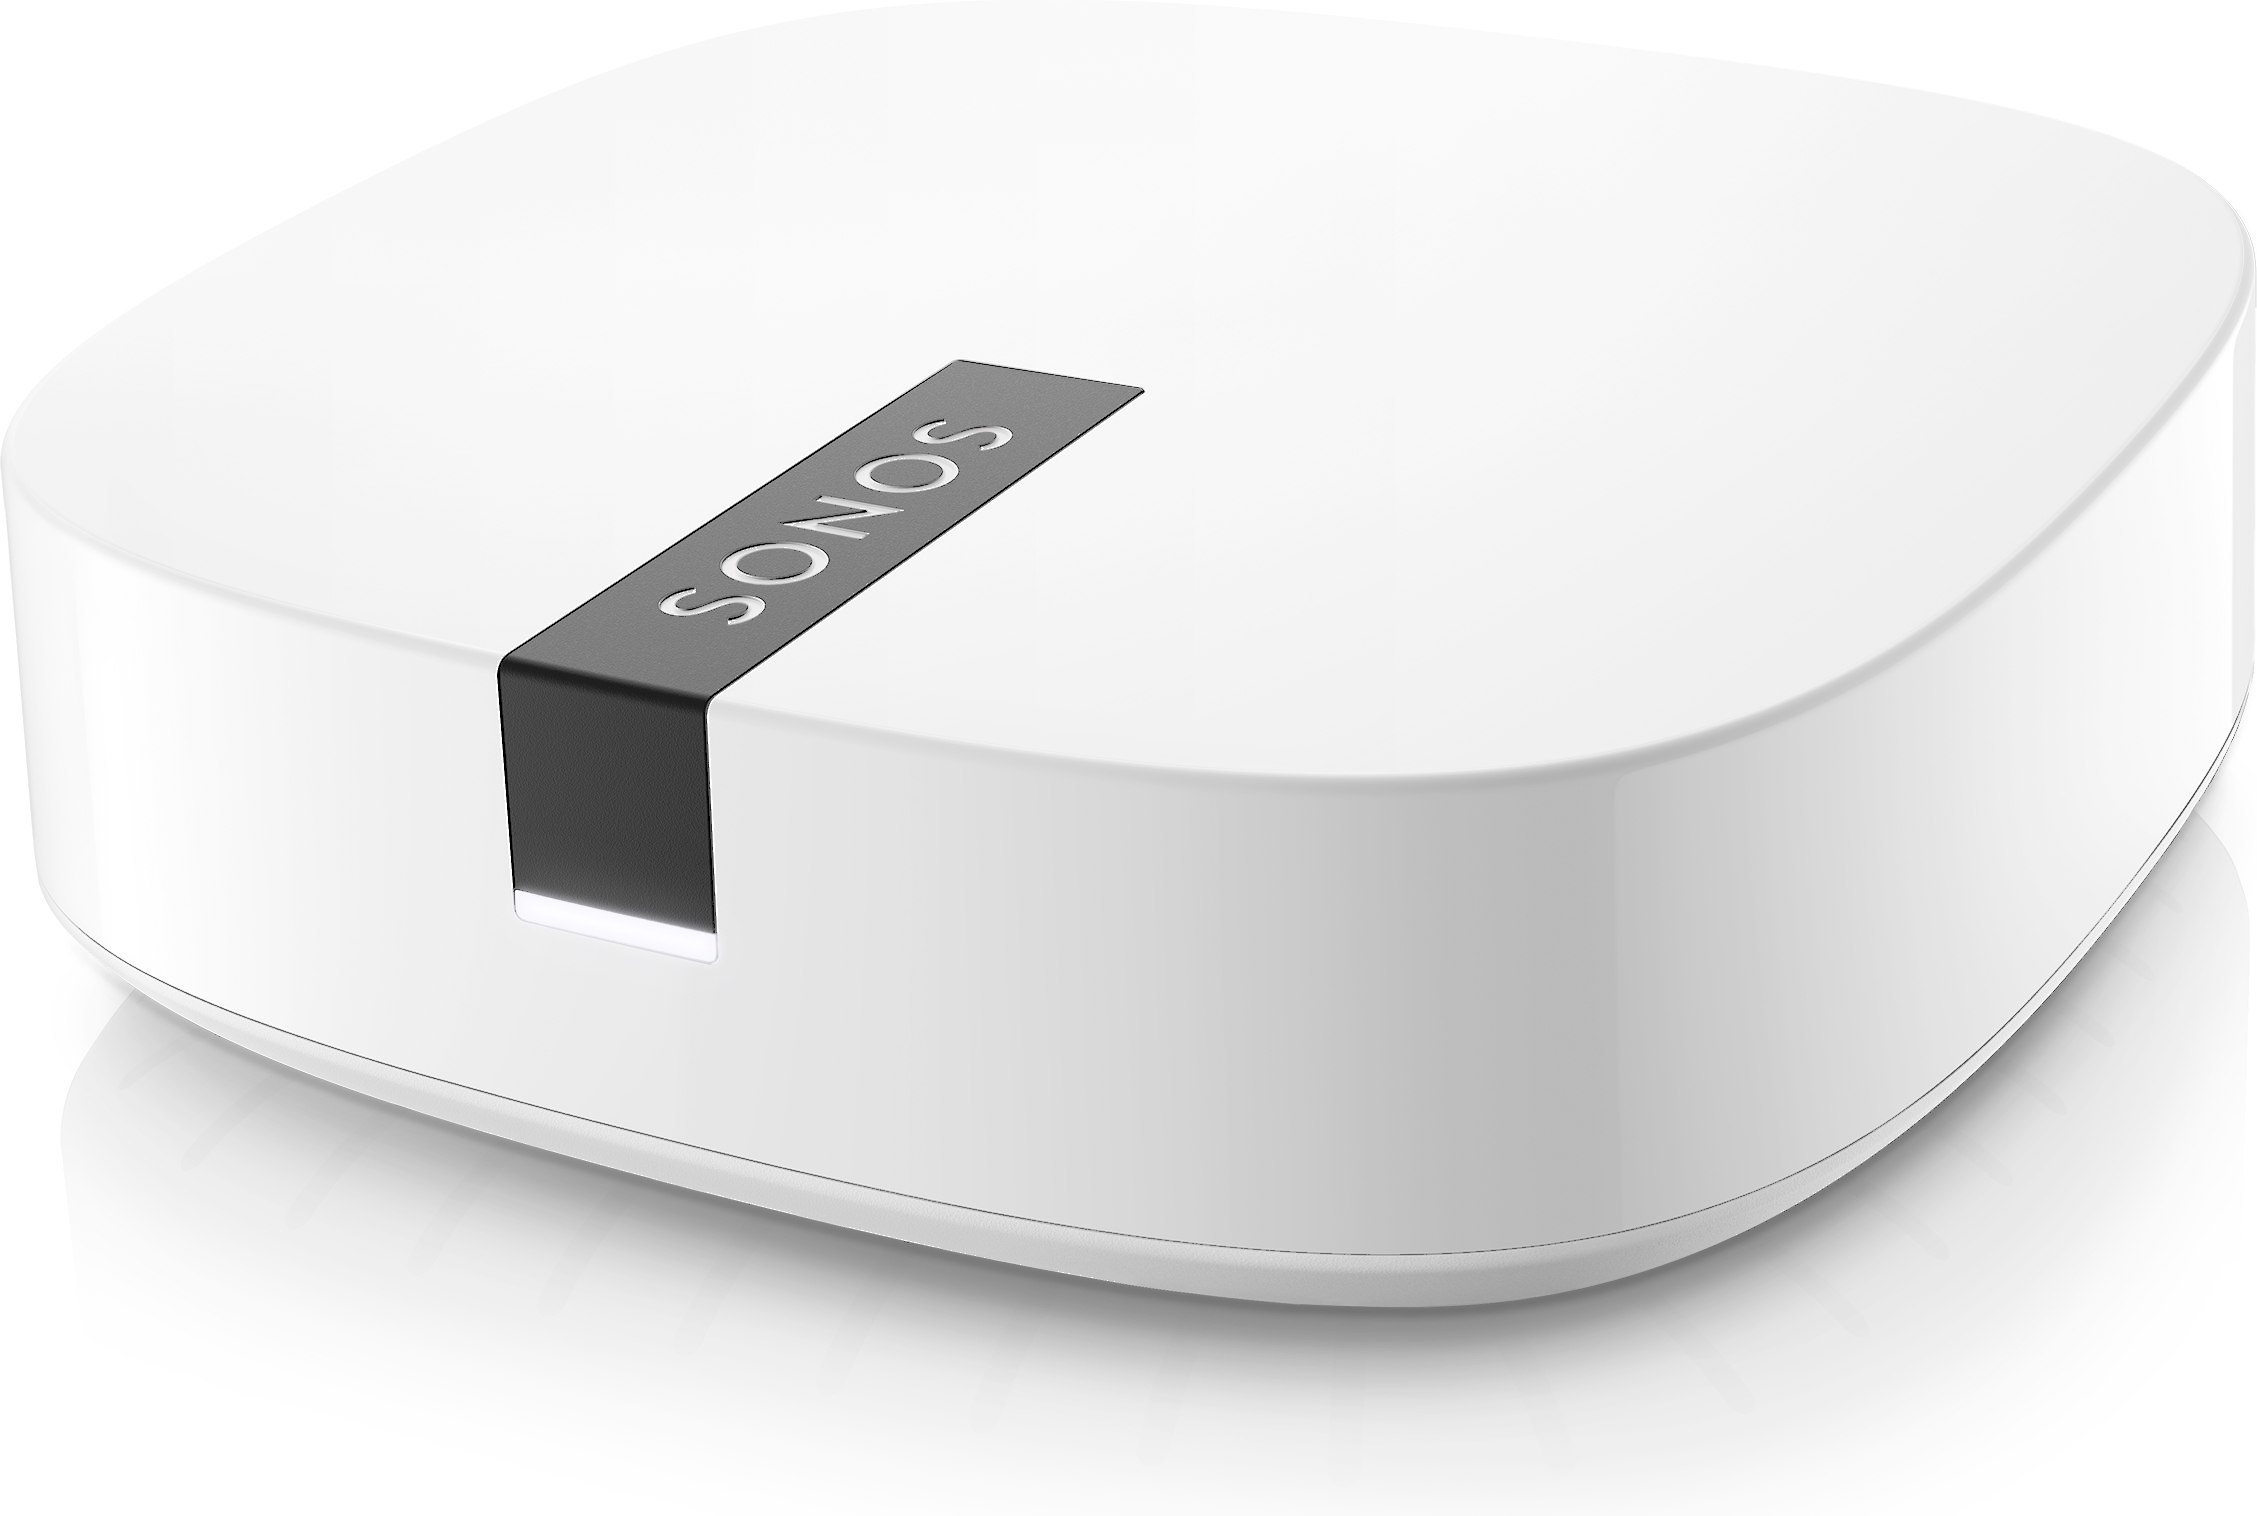 Customer Reviews: Boost High-performance network adapter for Sonos devices at